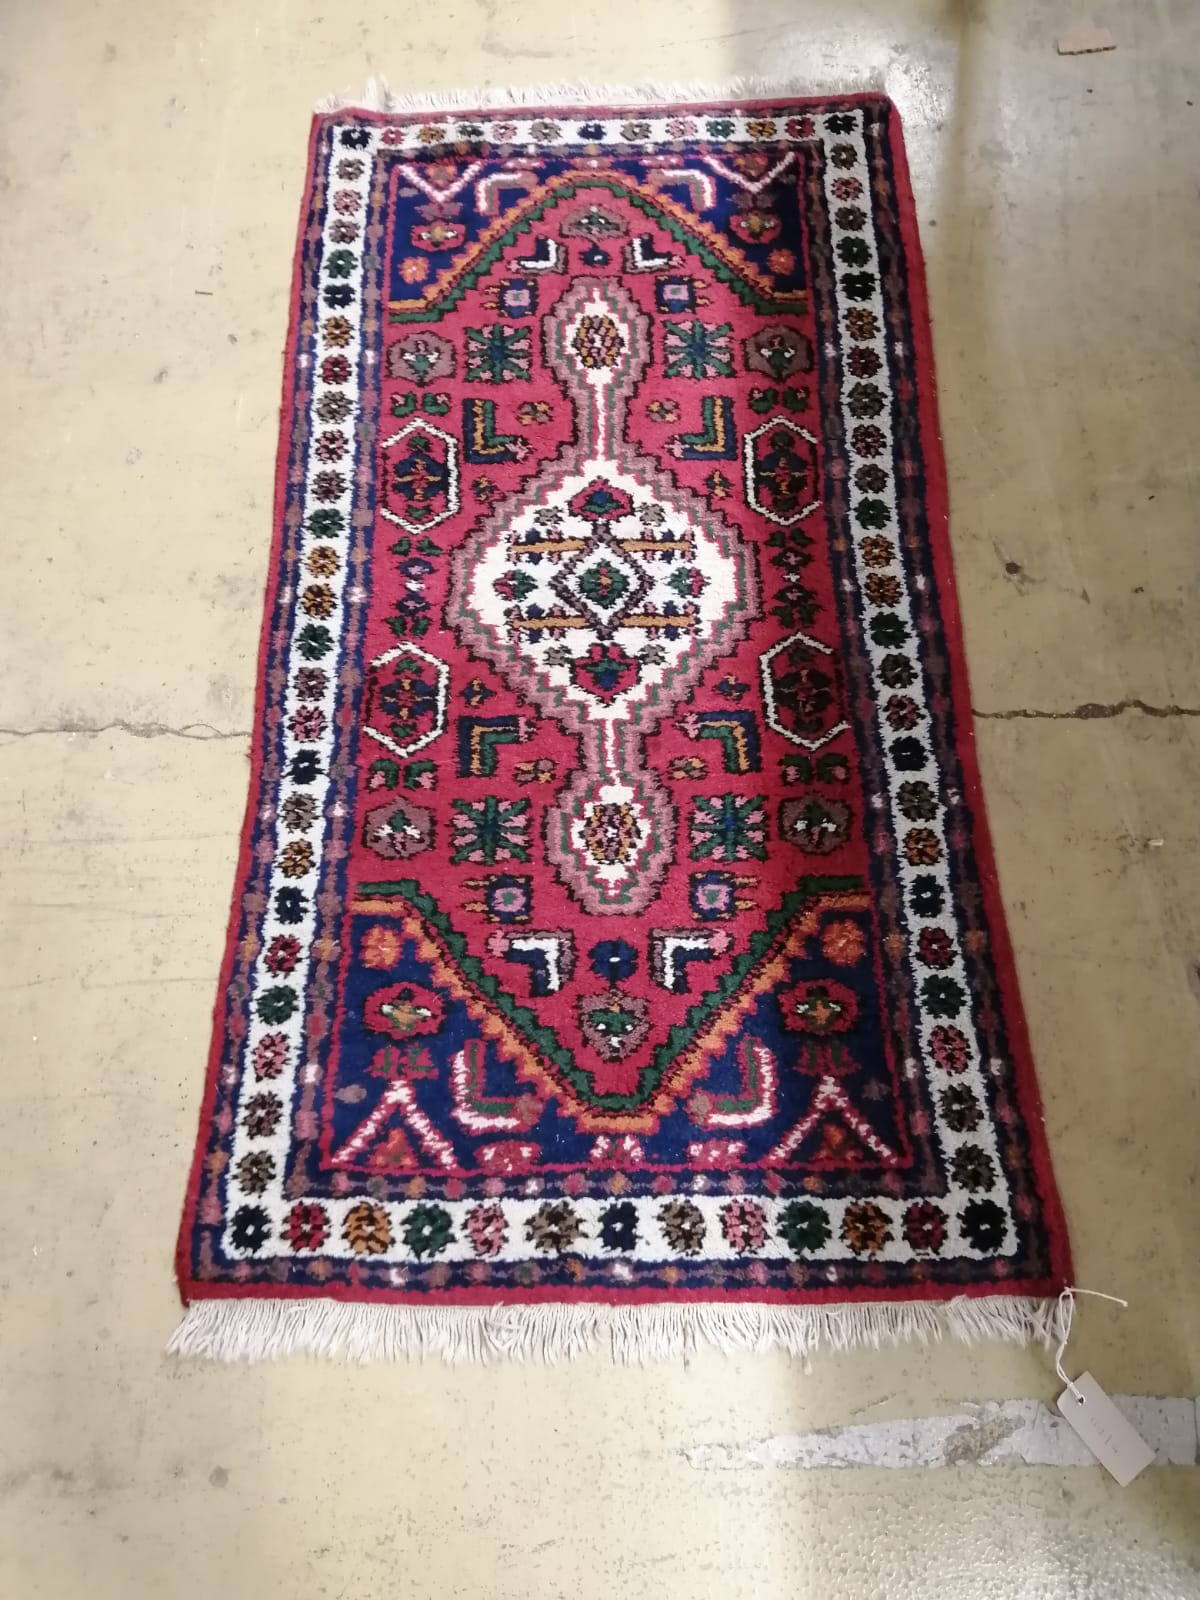 A Caucasian style red ground rug, 130cm x 68cm